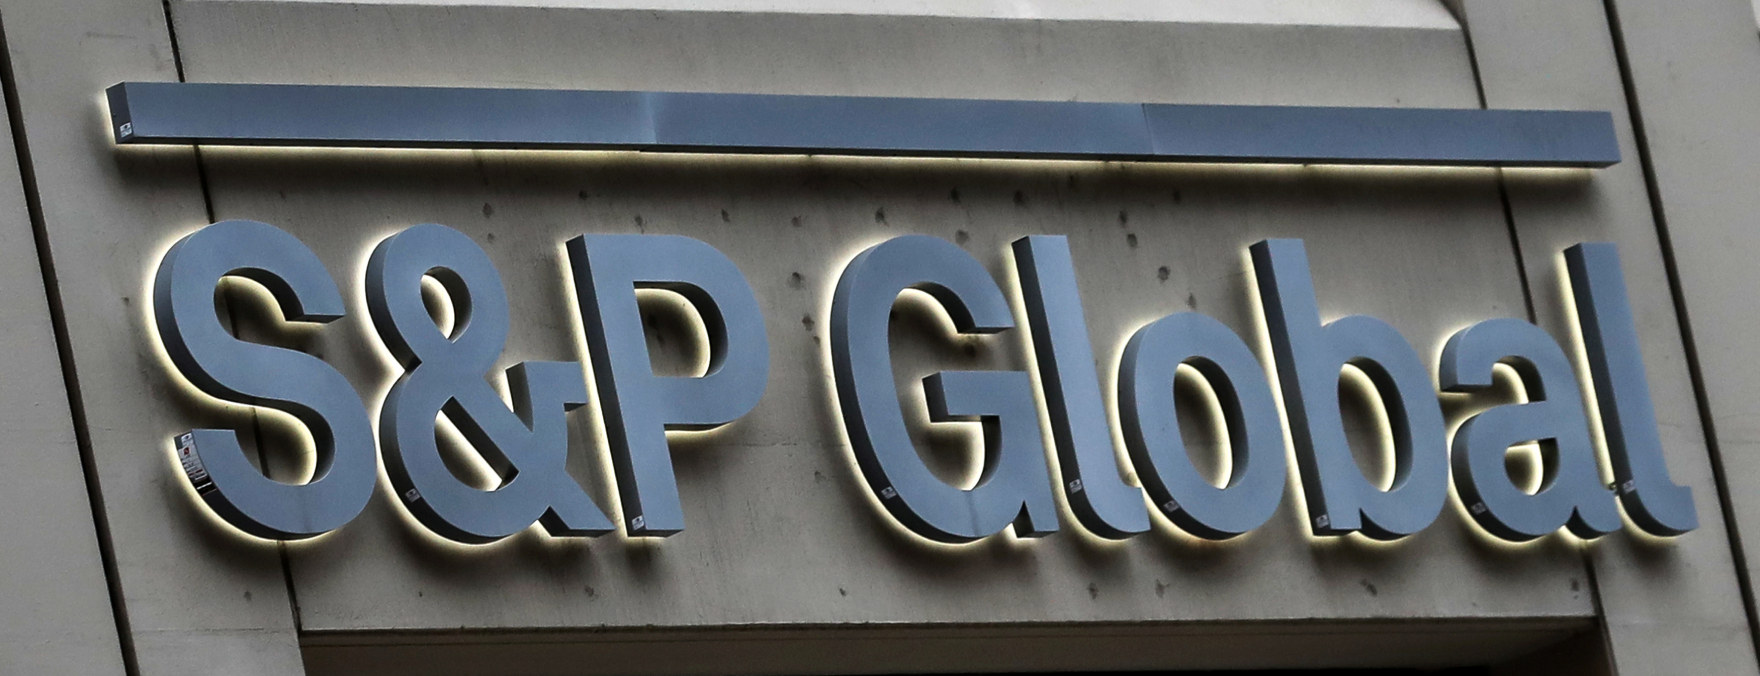 The logo of S&P Global Inc. in bluish grey color is displayed in a building's wall